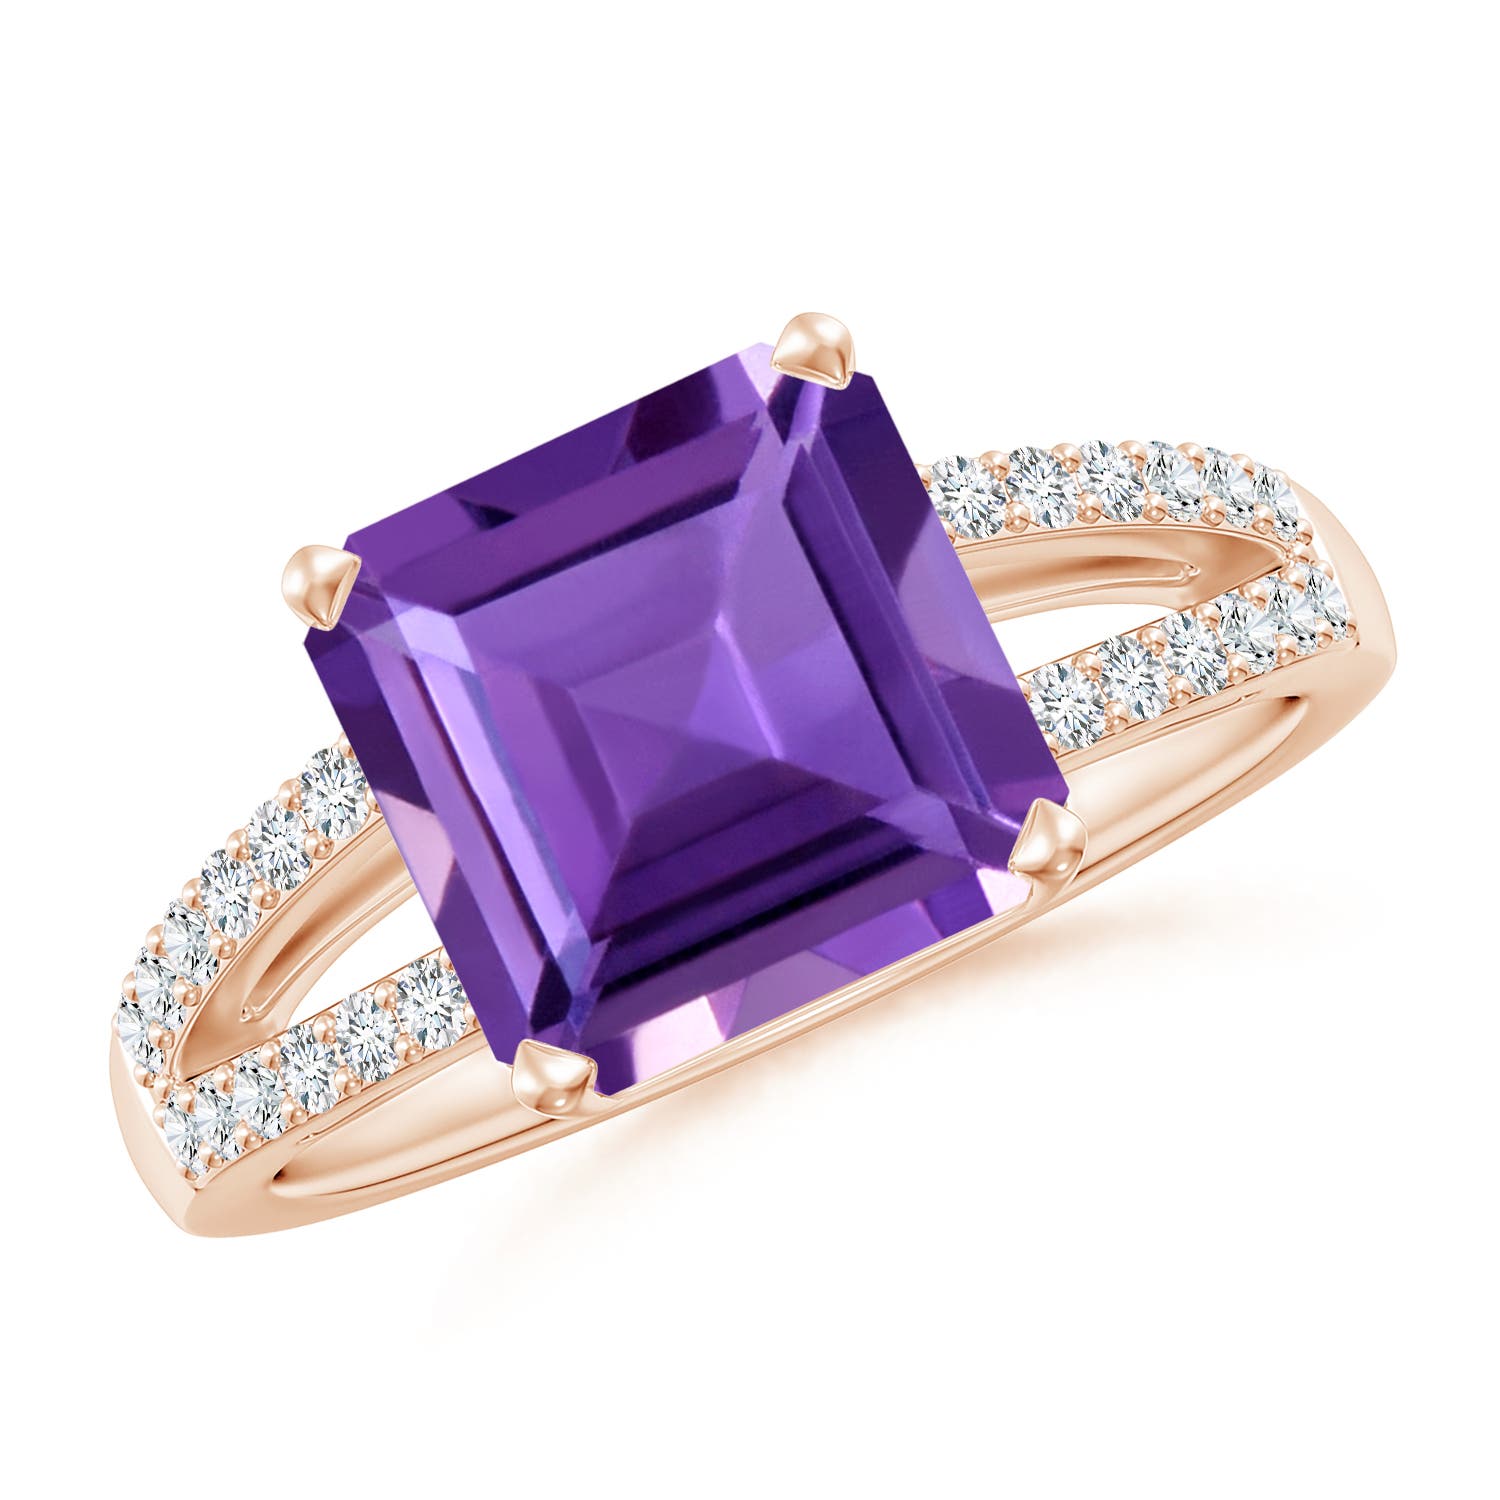 AAA - Amethyst / 3.04 CT / 14 KT Rose Gold